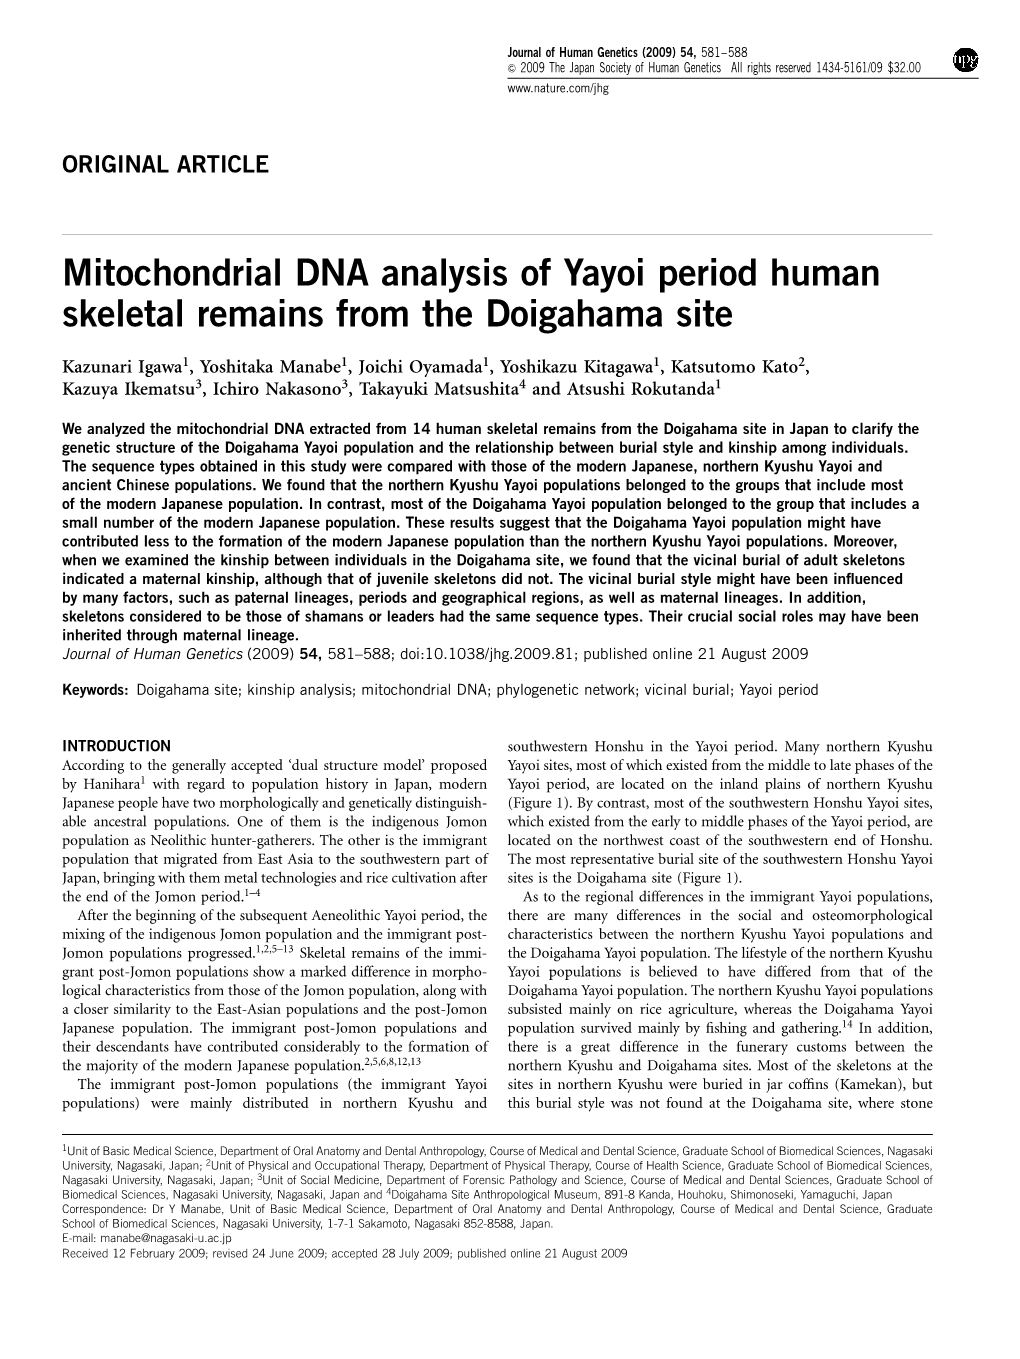 Mitochondrial DNA Analysis of Yayoi Period Human Skeletal Remains from the Doigahama Site